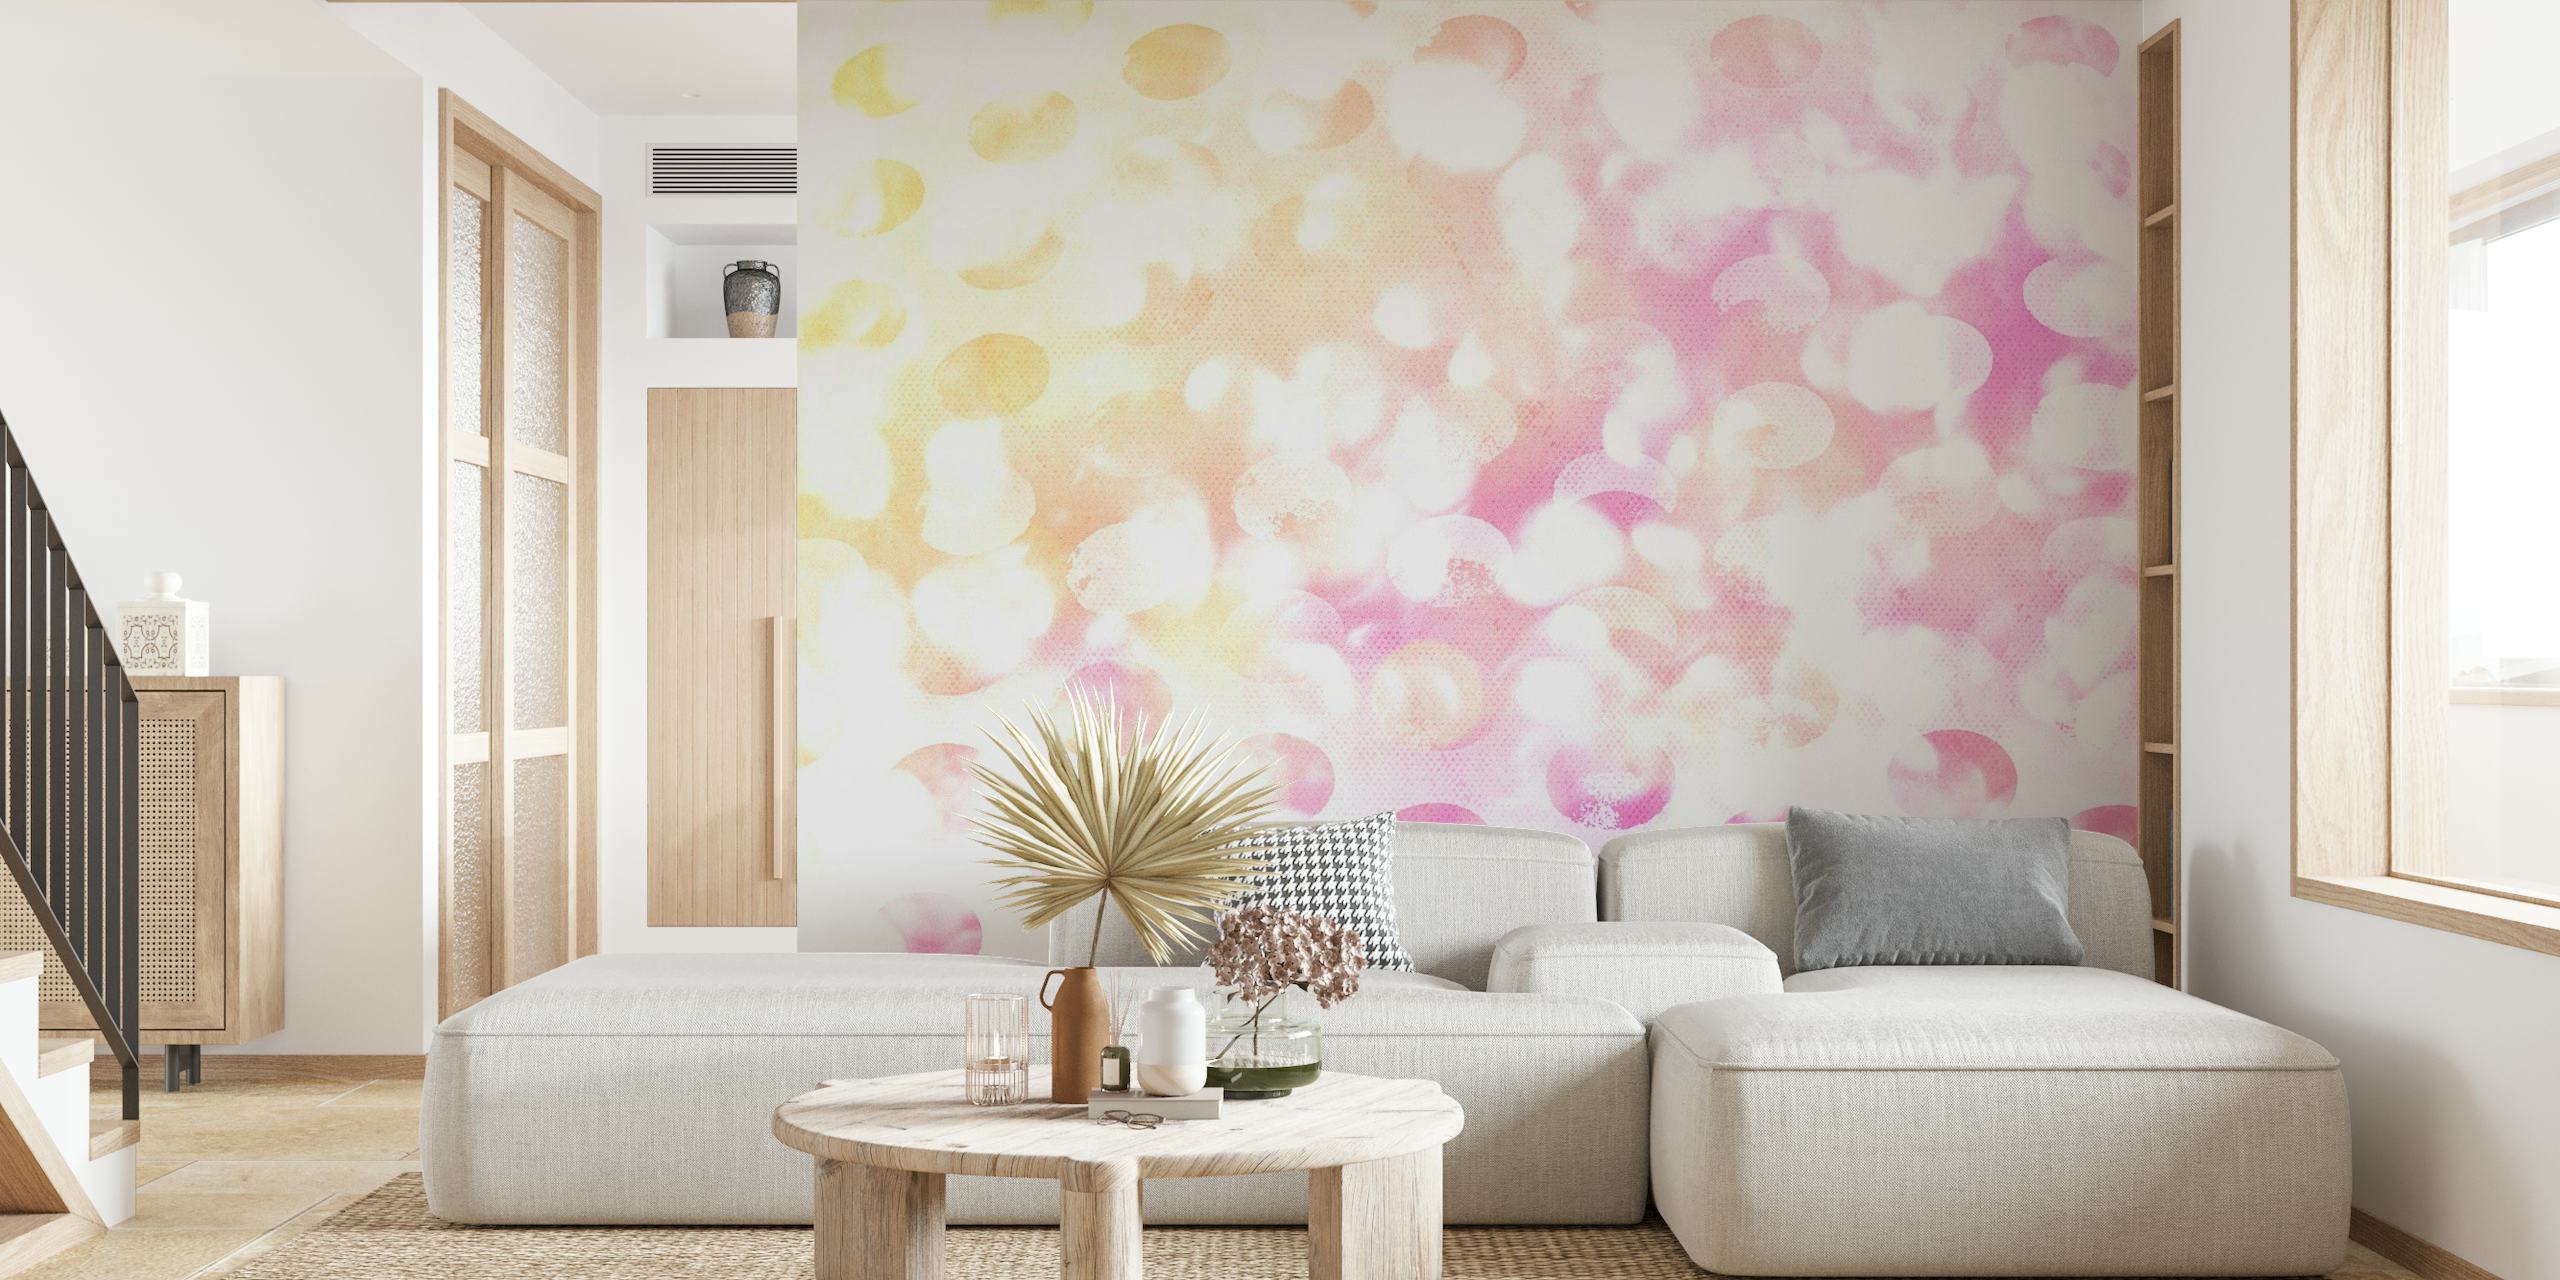 Abstract pastel pink and yellow cotton candy-inspired wall mural art